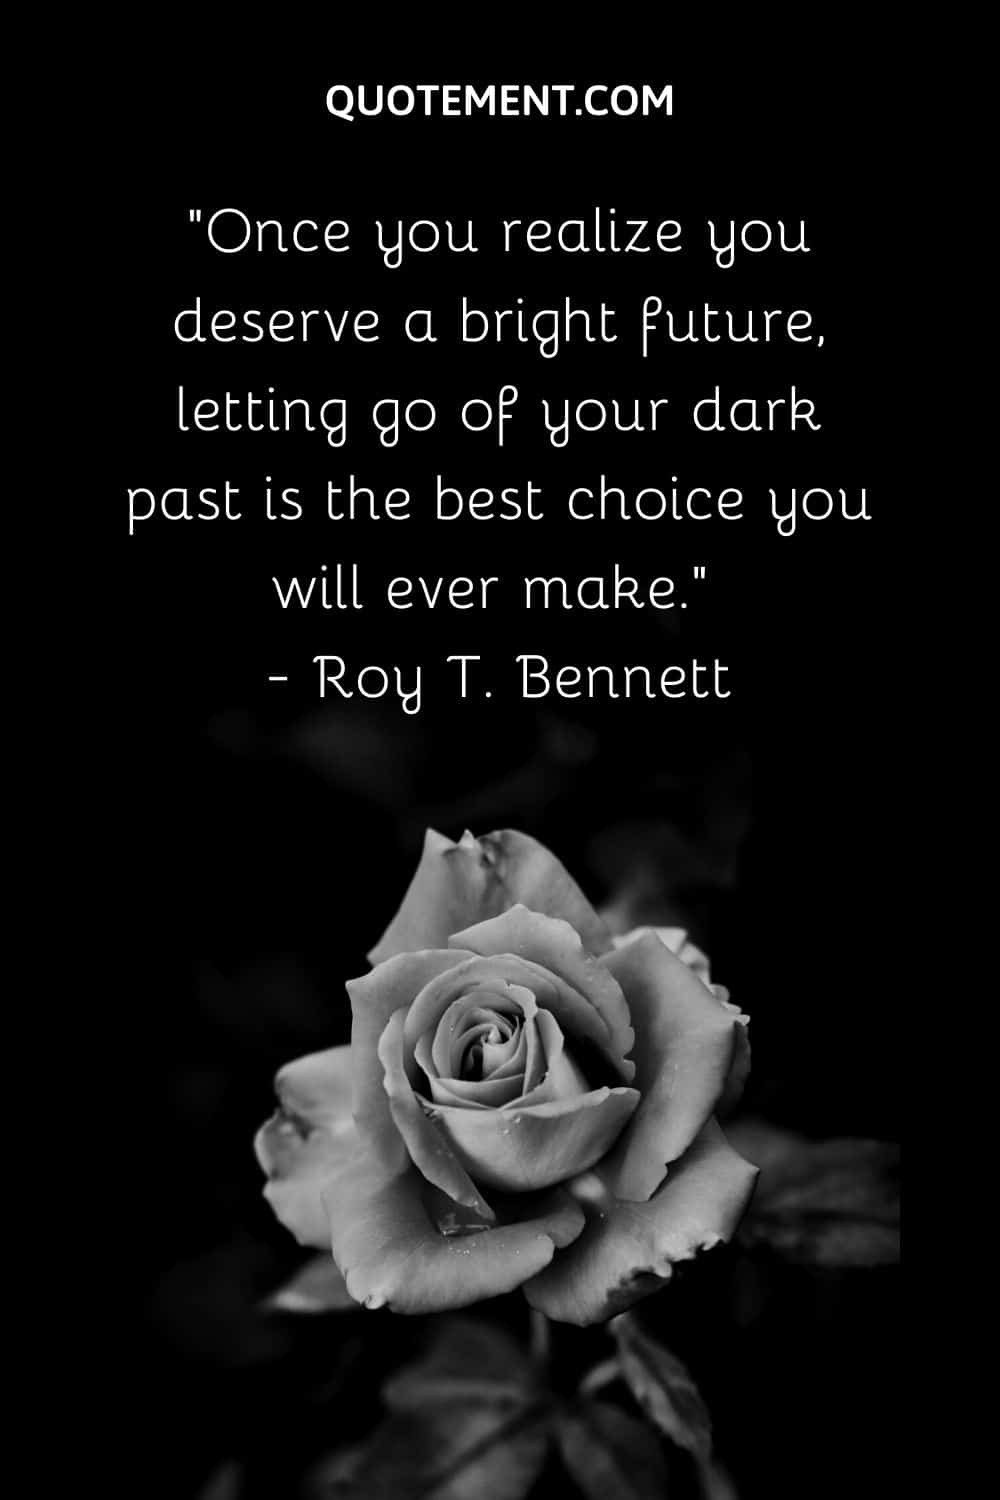 letting go of your dark past is the best choice you will ever make.